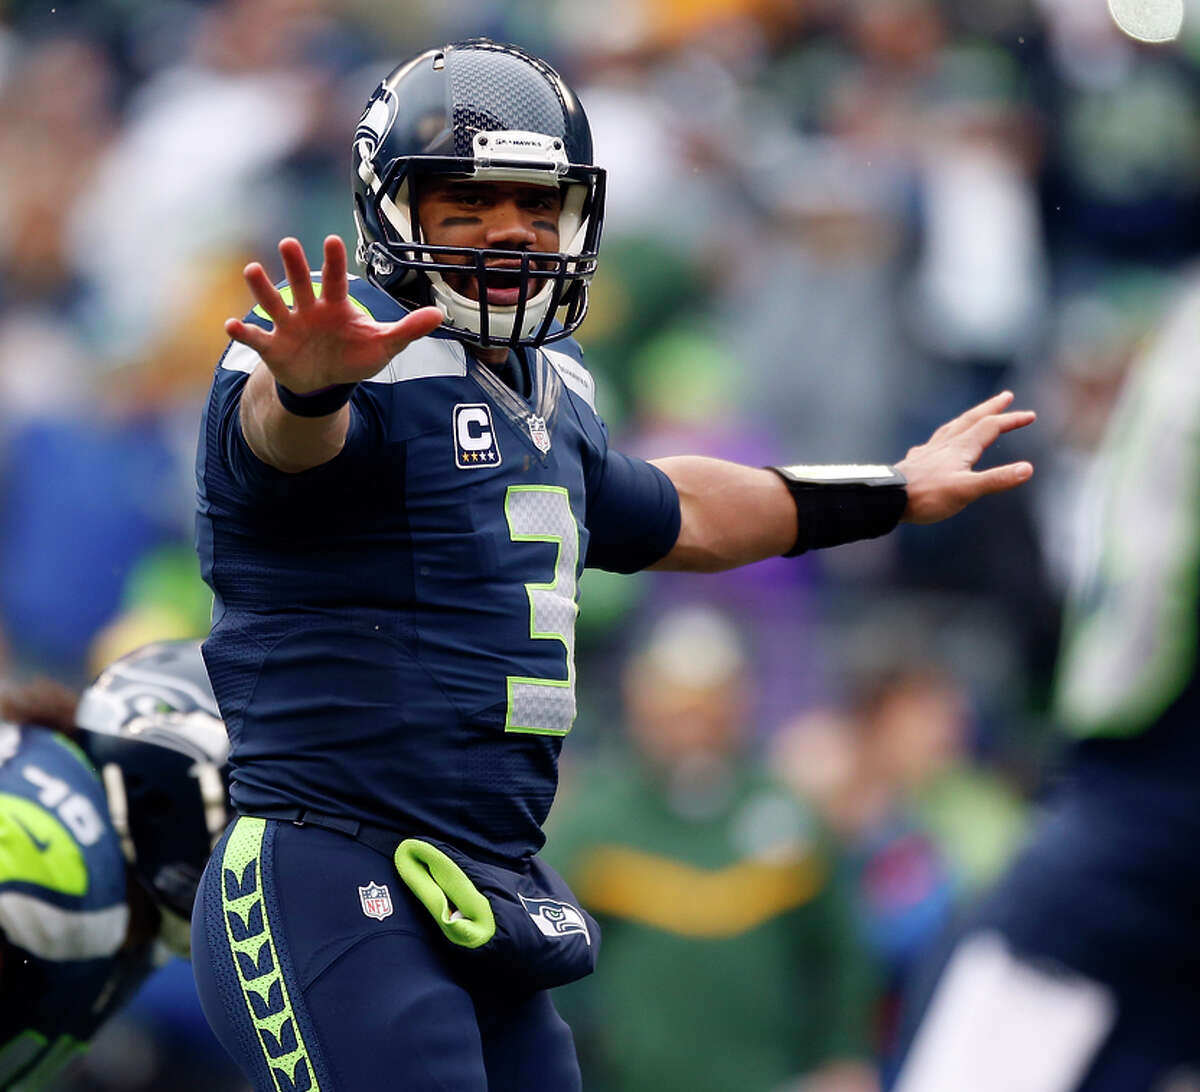 SEATTLE, WA - JANUARY 18: Russell Wilson #3 of the Seattle Seahawks calls out a play during the second half o the 2015 NFC Championship game against the Green Bay Packers at CenturyLink Field on January 18, 2015 in Seattle, Washington. (Photo by Otto Greule Jr/Getty Images)